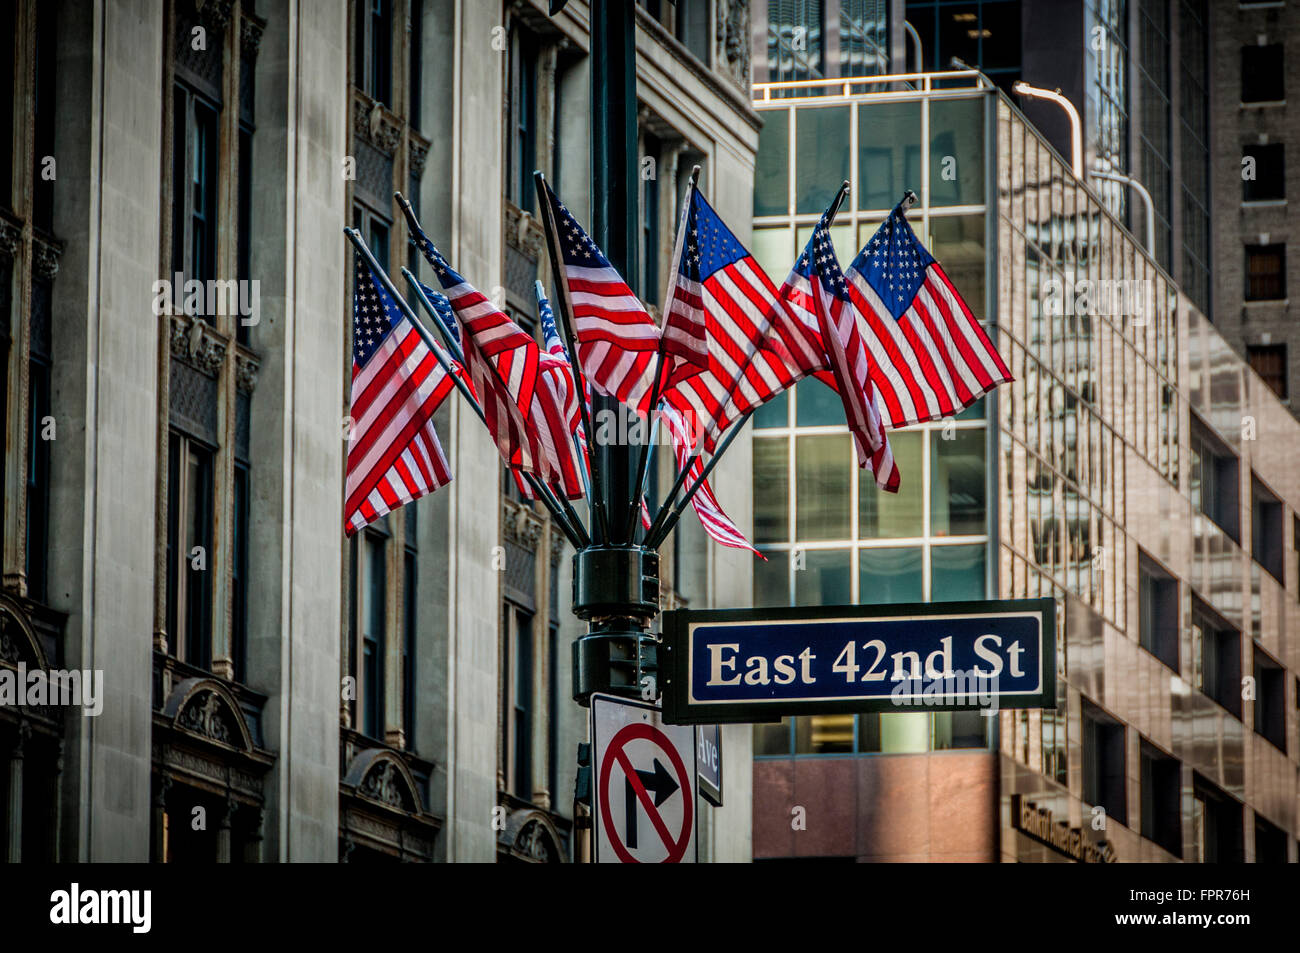 East 42nd St sign and group of American flags on lamppost, New York City, USA. Stock Photo